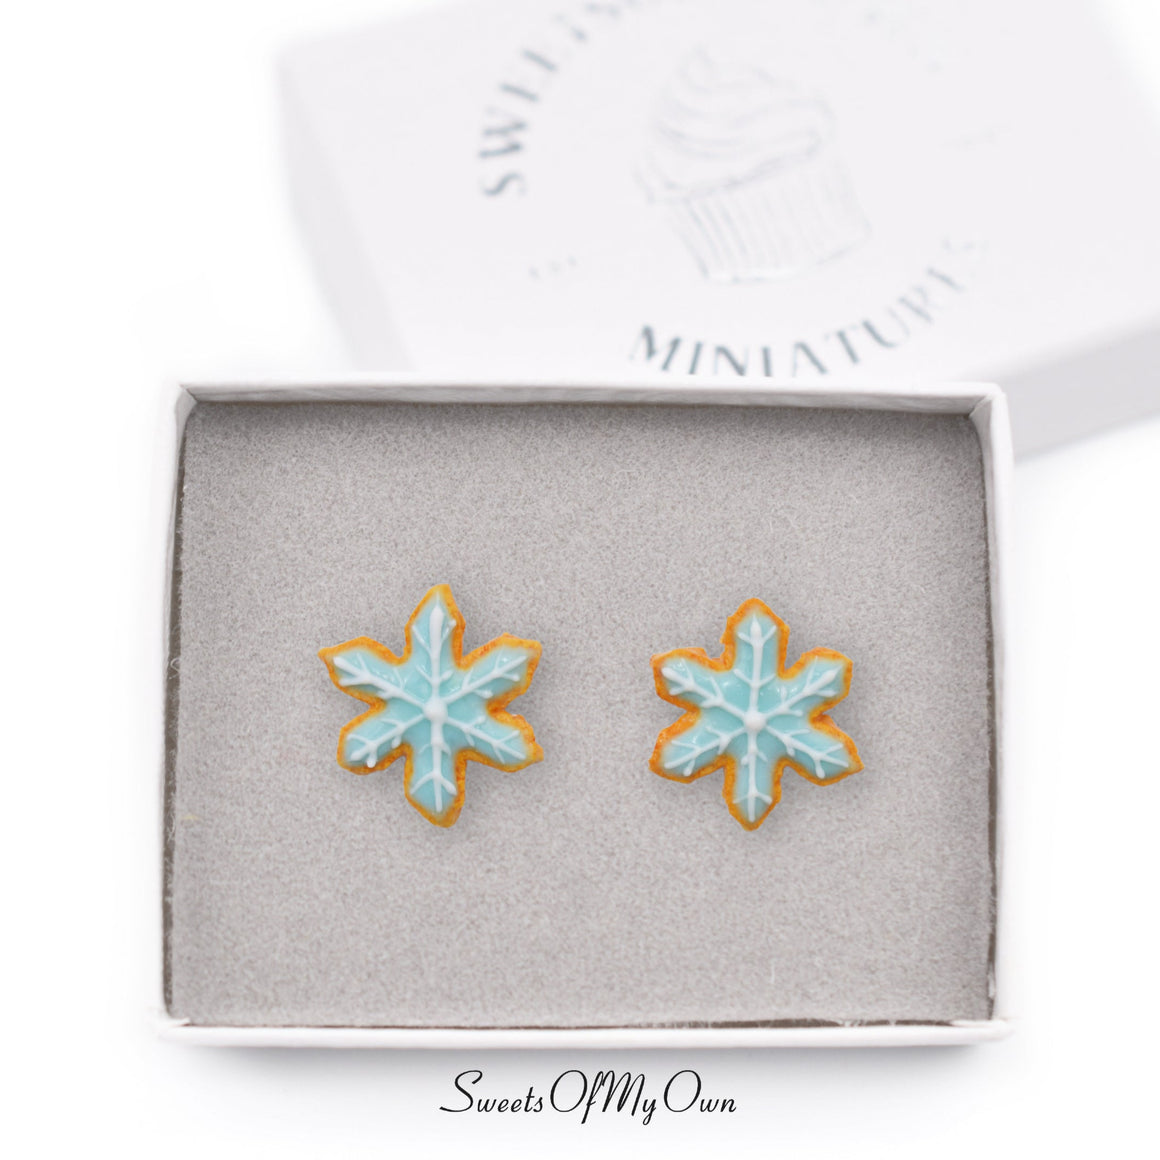 Snowflake Shaped Icing Biscuit - Stud Earrings - Choose Your Style